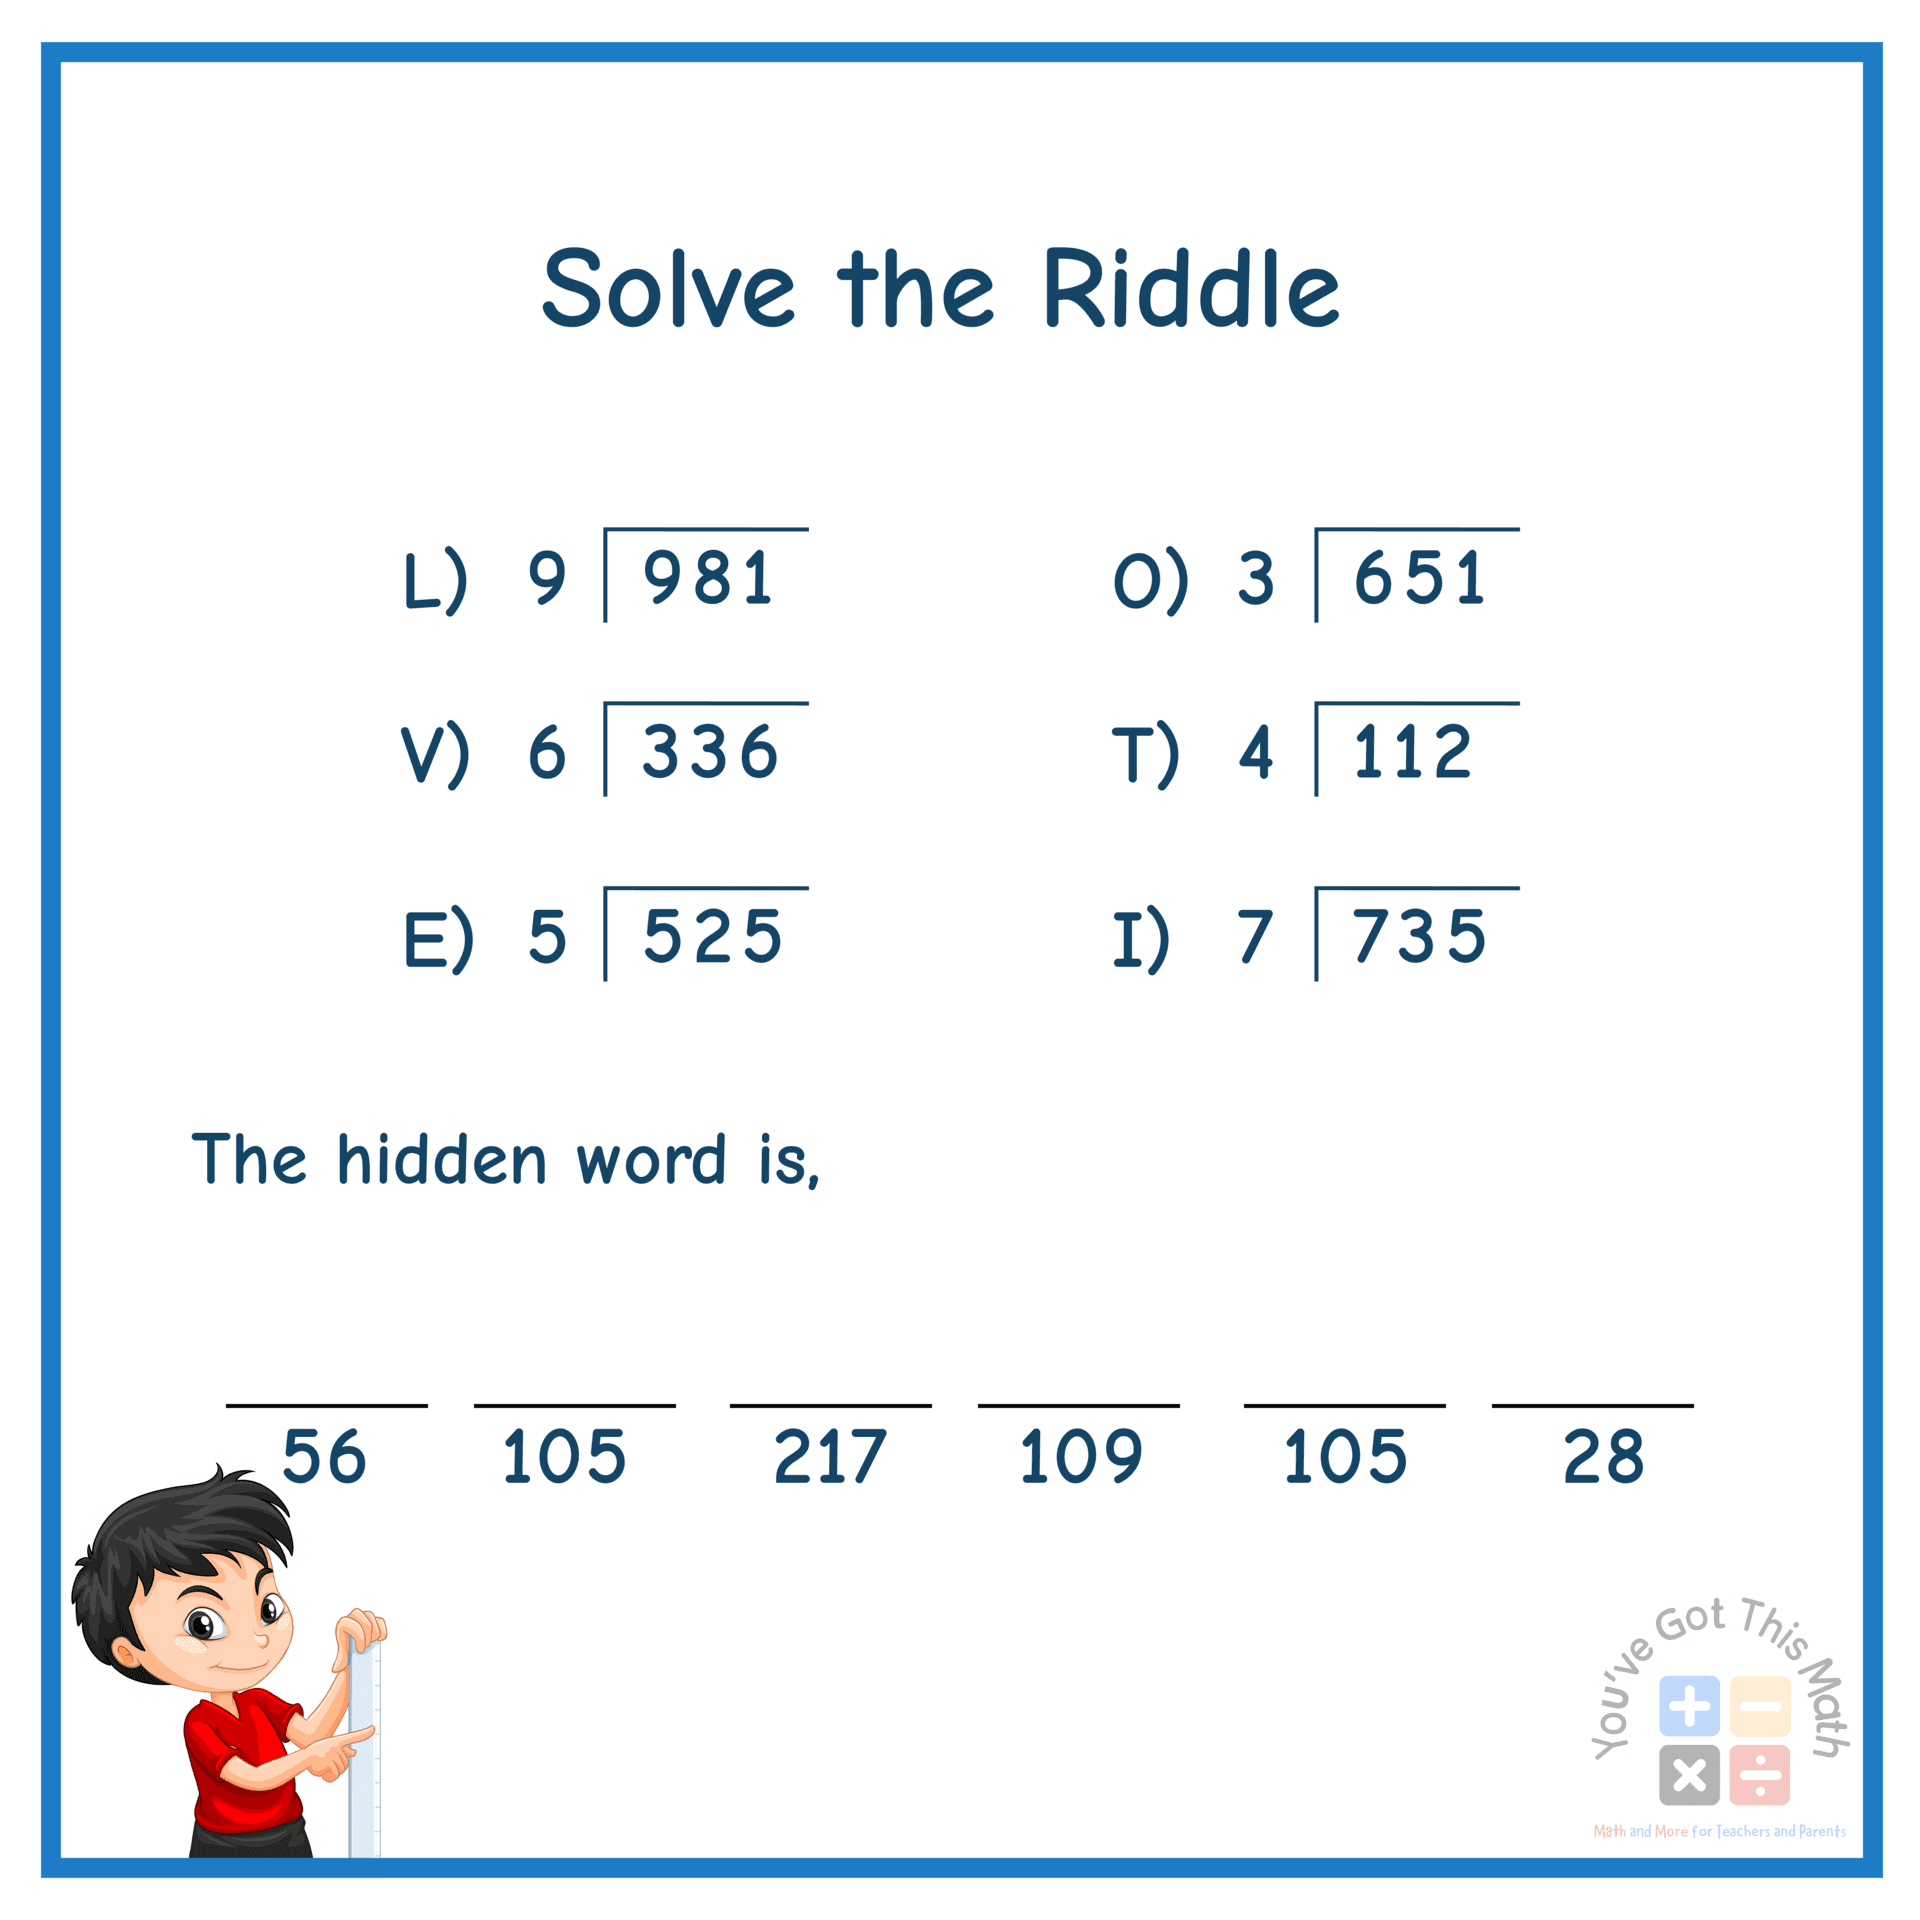 Solving Riddles of Long Division without Remainders to Find Hidden Words